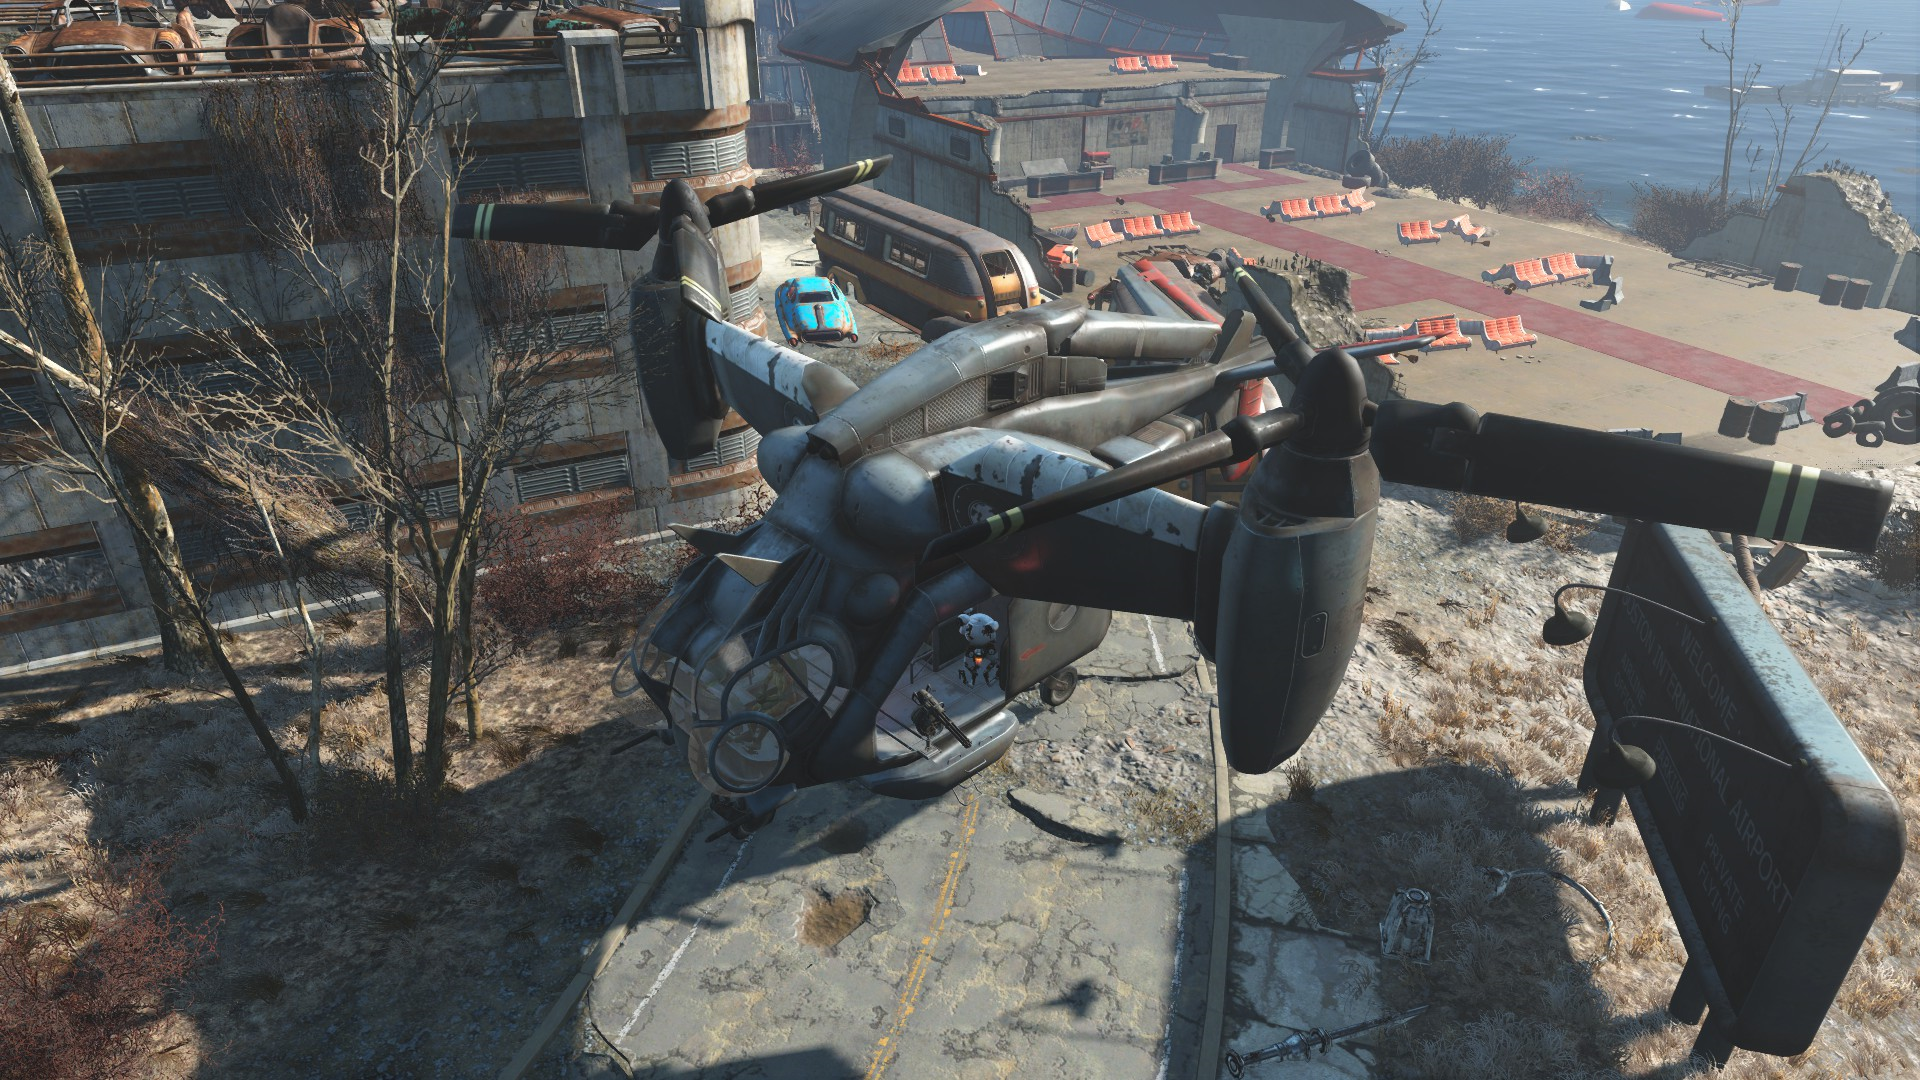 Vertibirds in fallout 4 фото 111